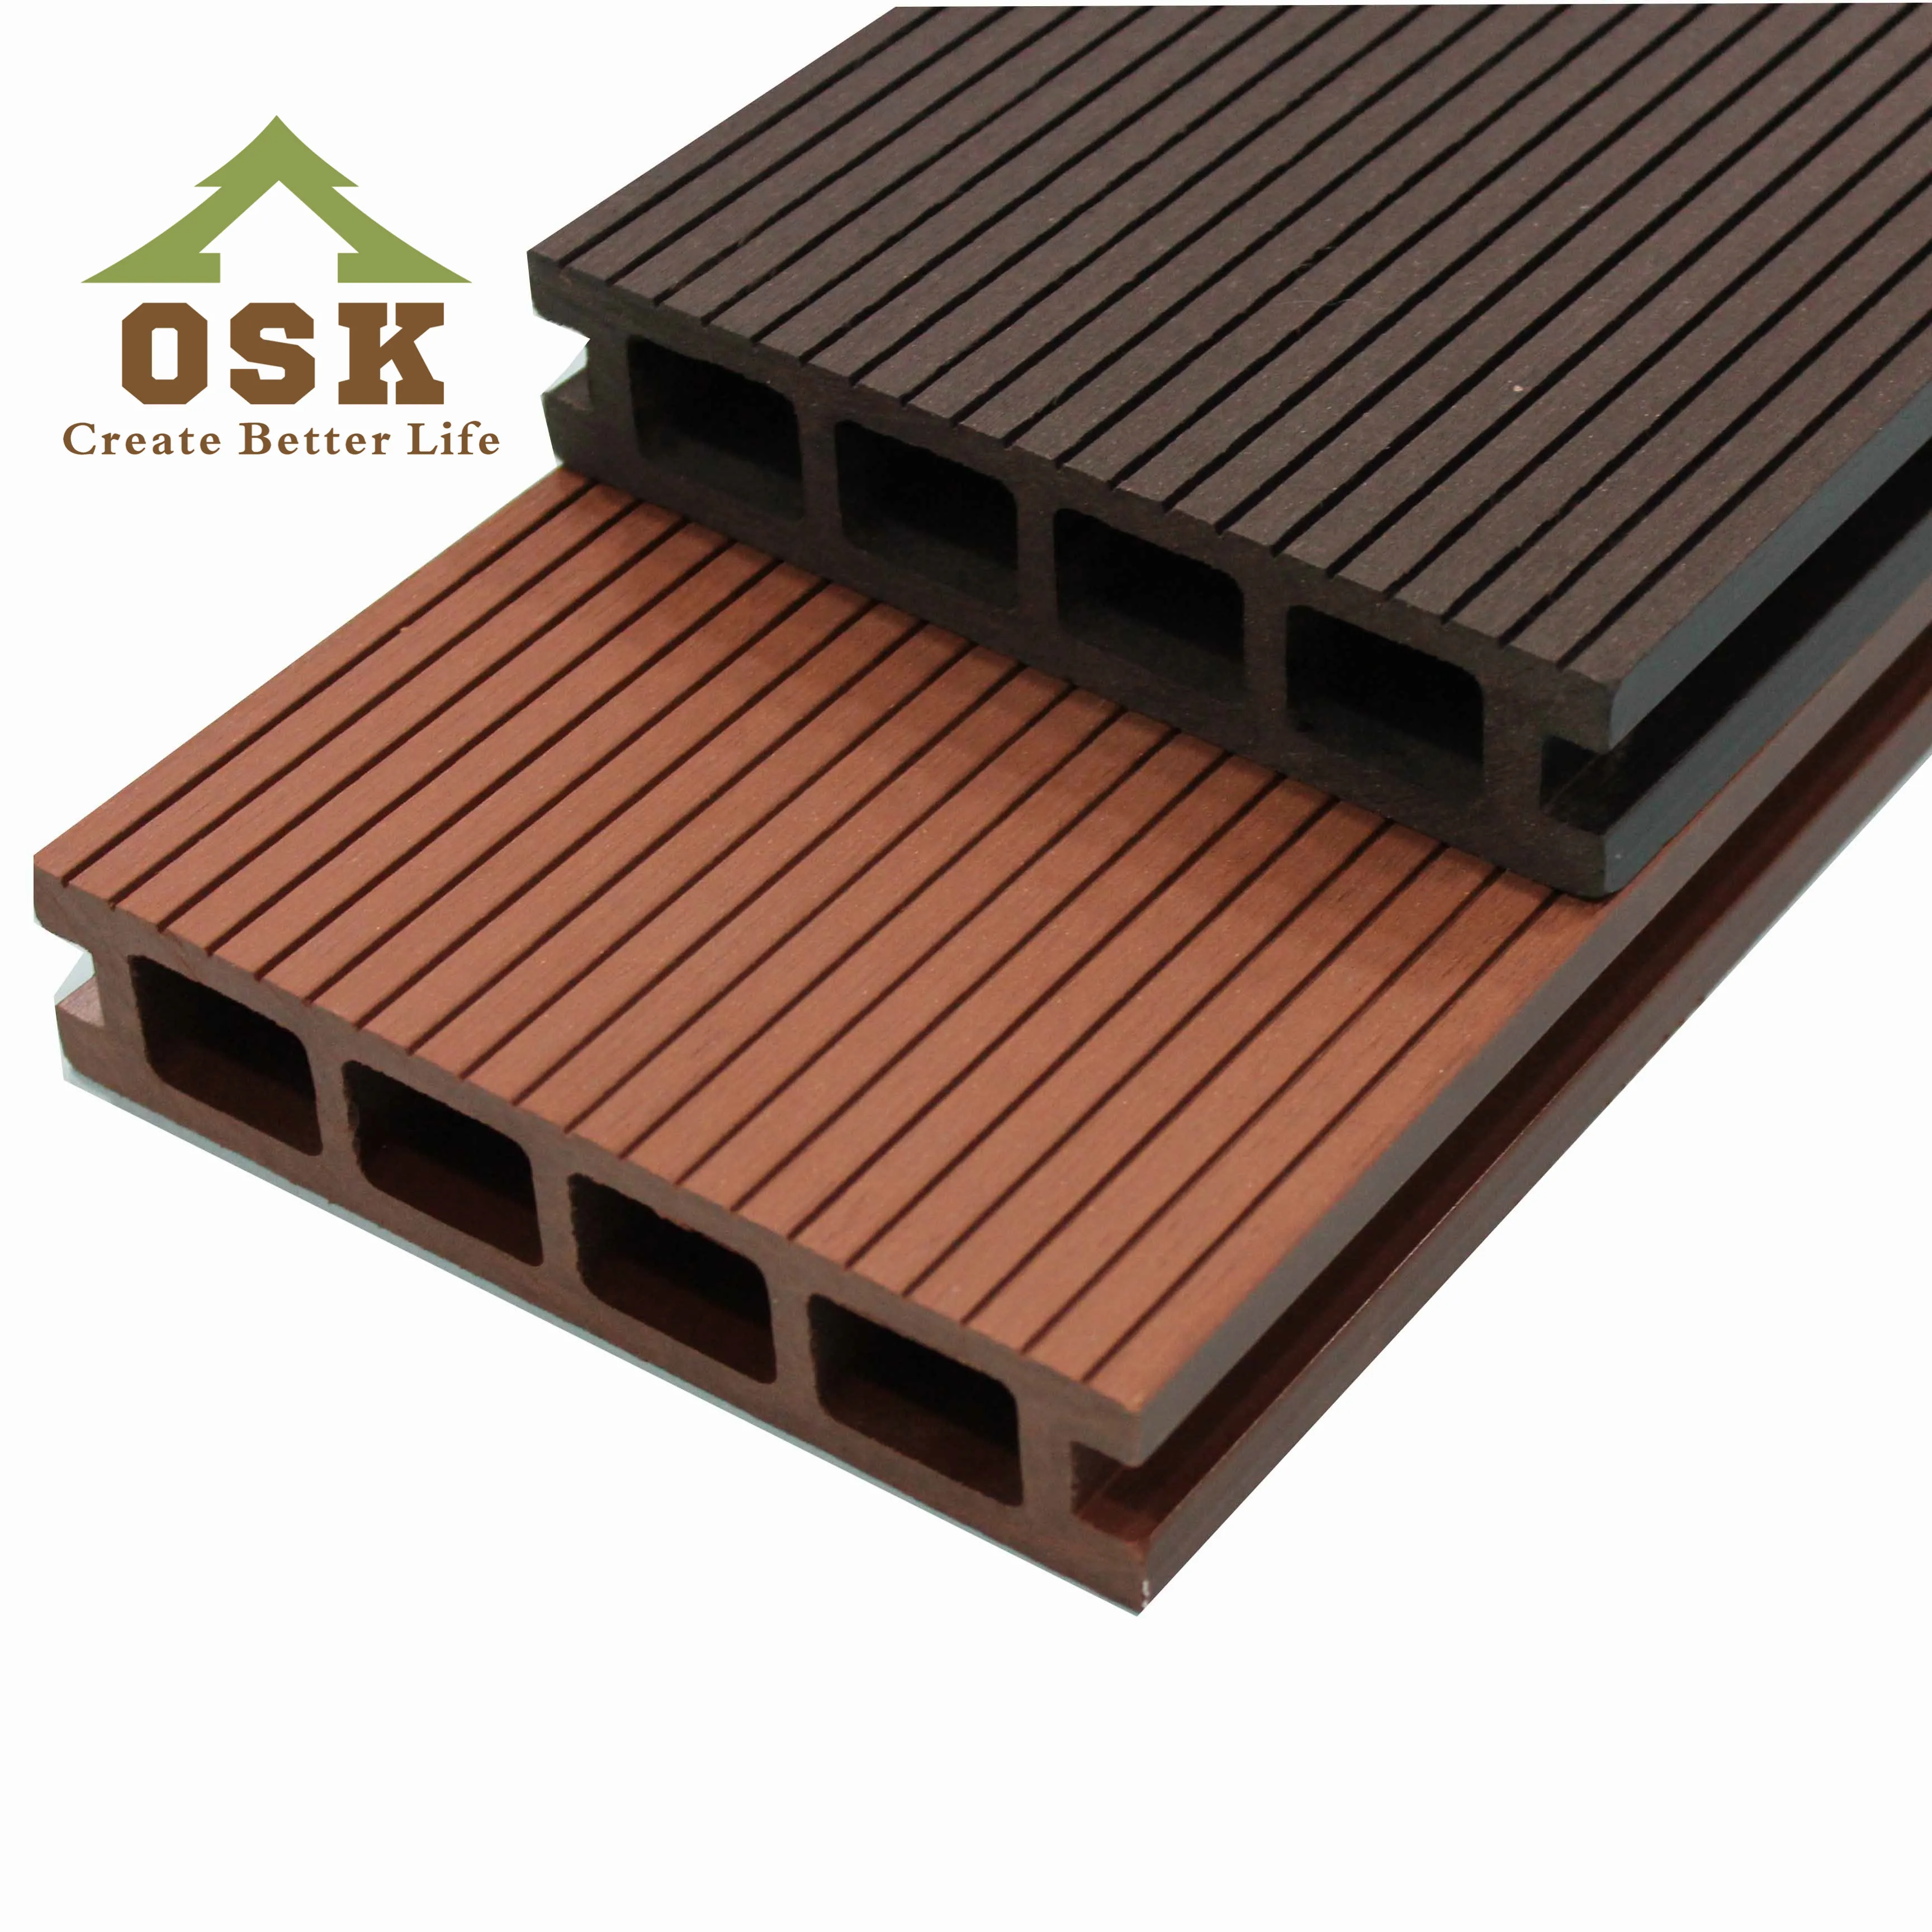 Factory Price Eco Wpc Outdoor Flooring Composite Decking Wpc Decking Flooring Buy Decking Outdoor Wpc Flooring Wpc Board Product On Alibaba Com